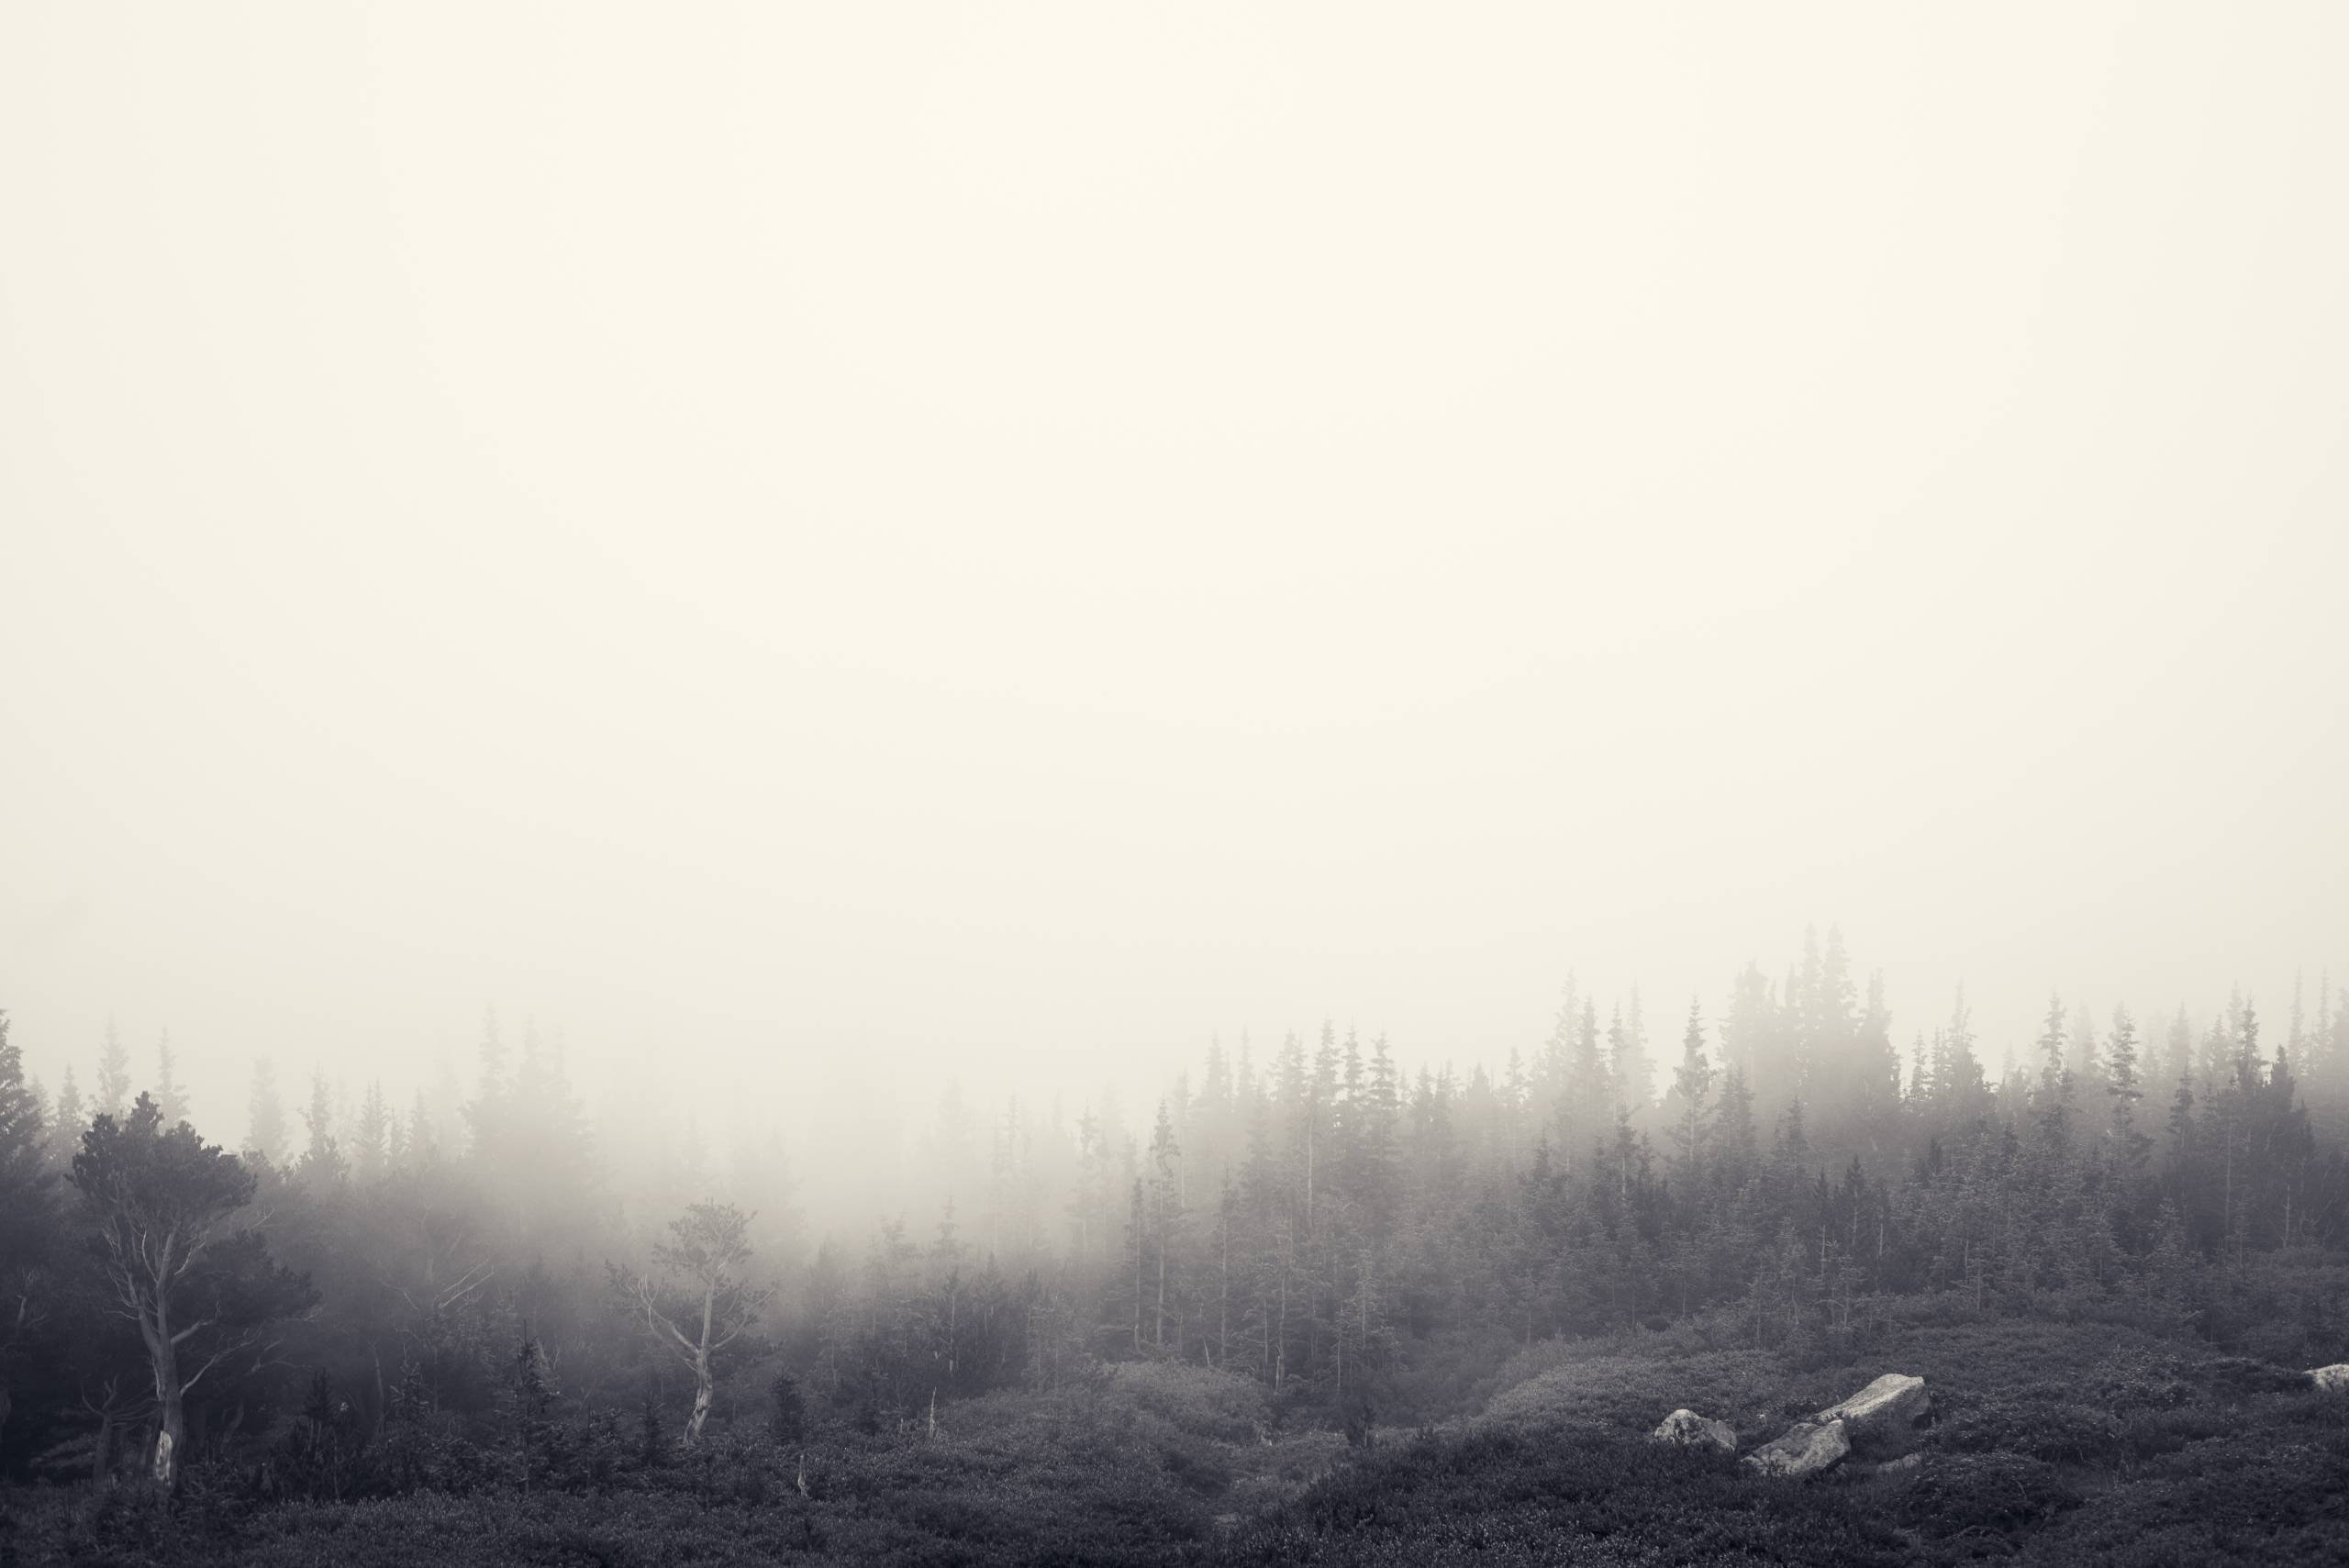 A black and white photo of fog in the forest - Foggy forest